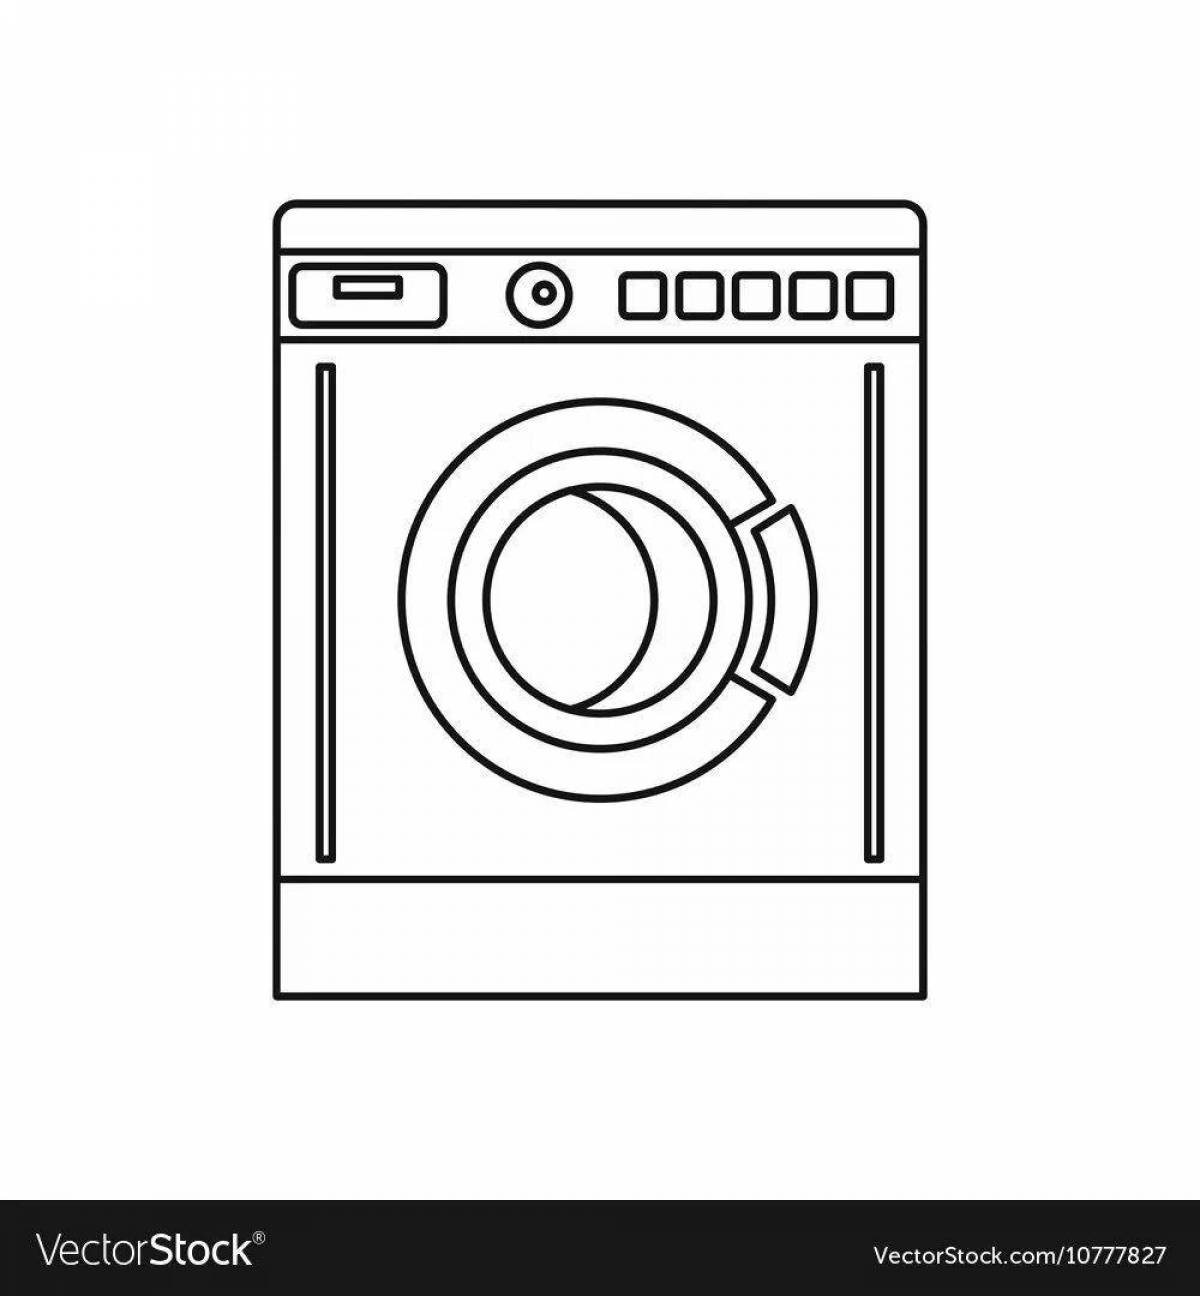 Grand fixies washing machine coloring page